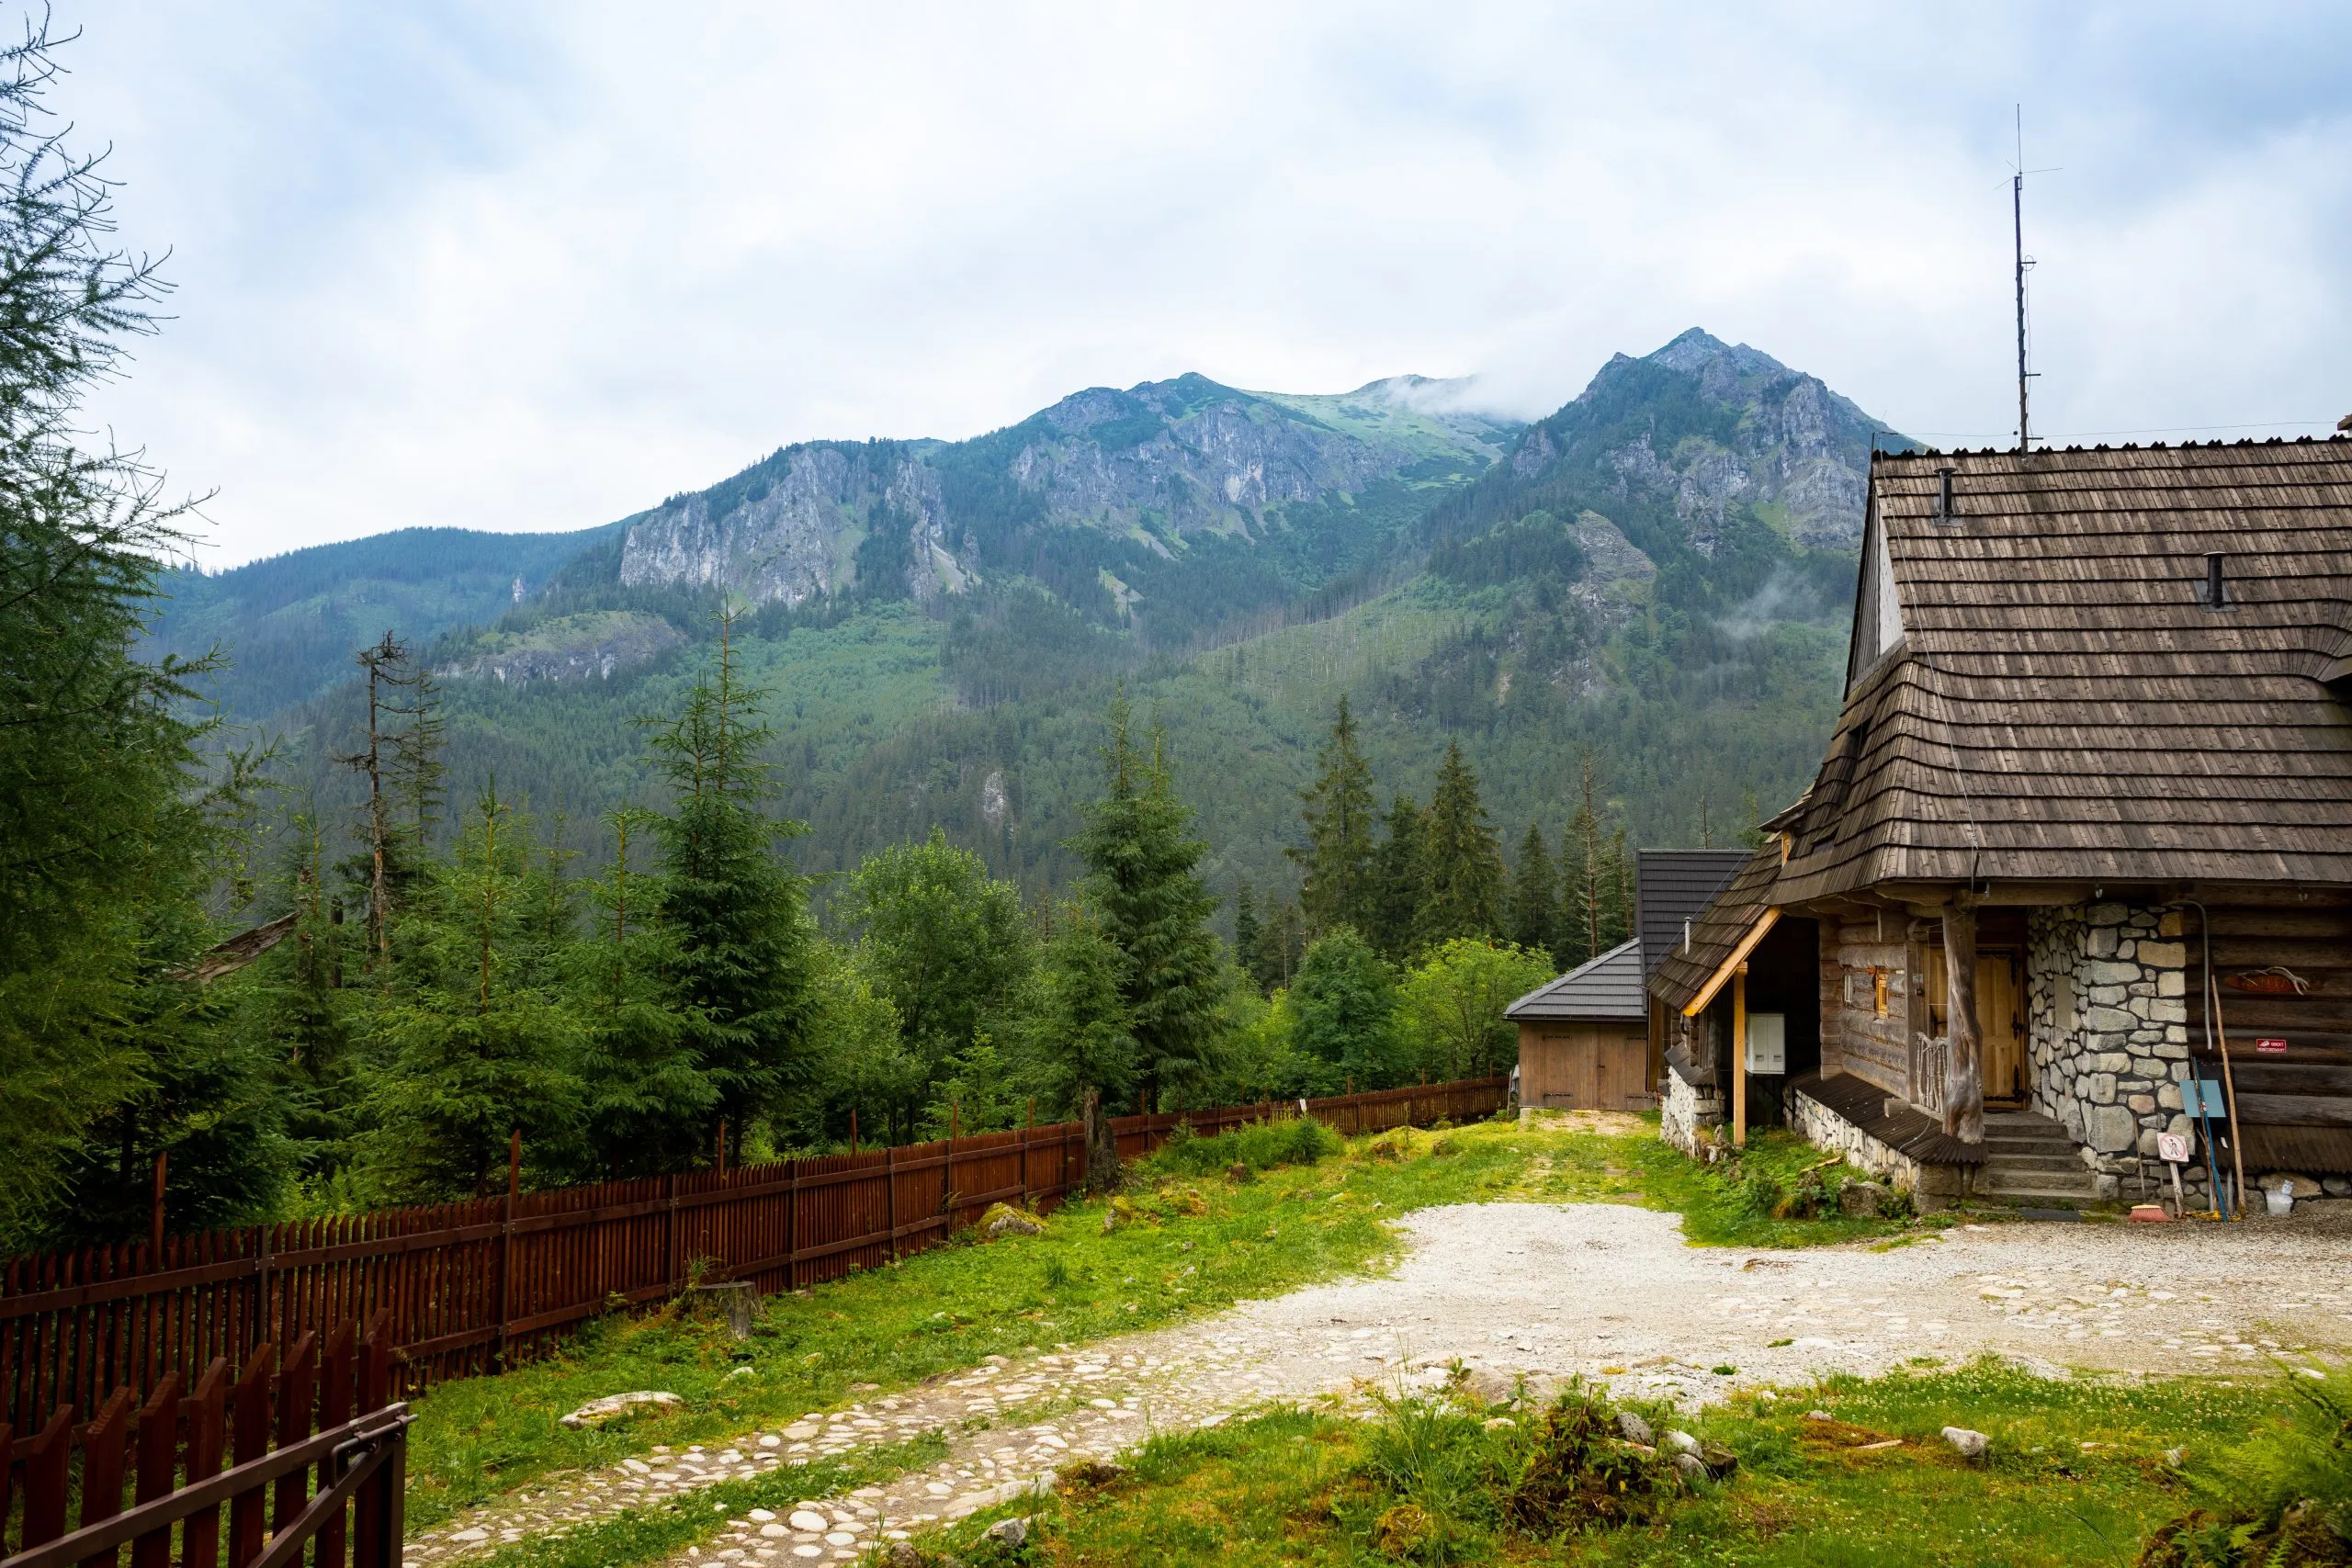 Old wooden house in the middle of the forest against the backdrop of mountains near the road to Morskie Oko, Poland